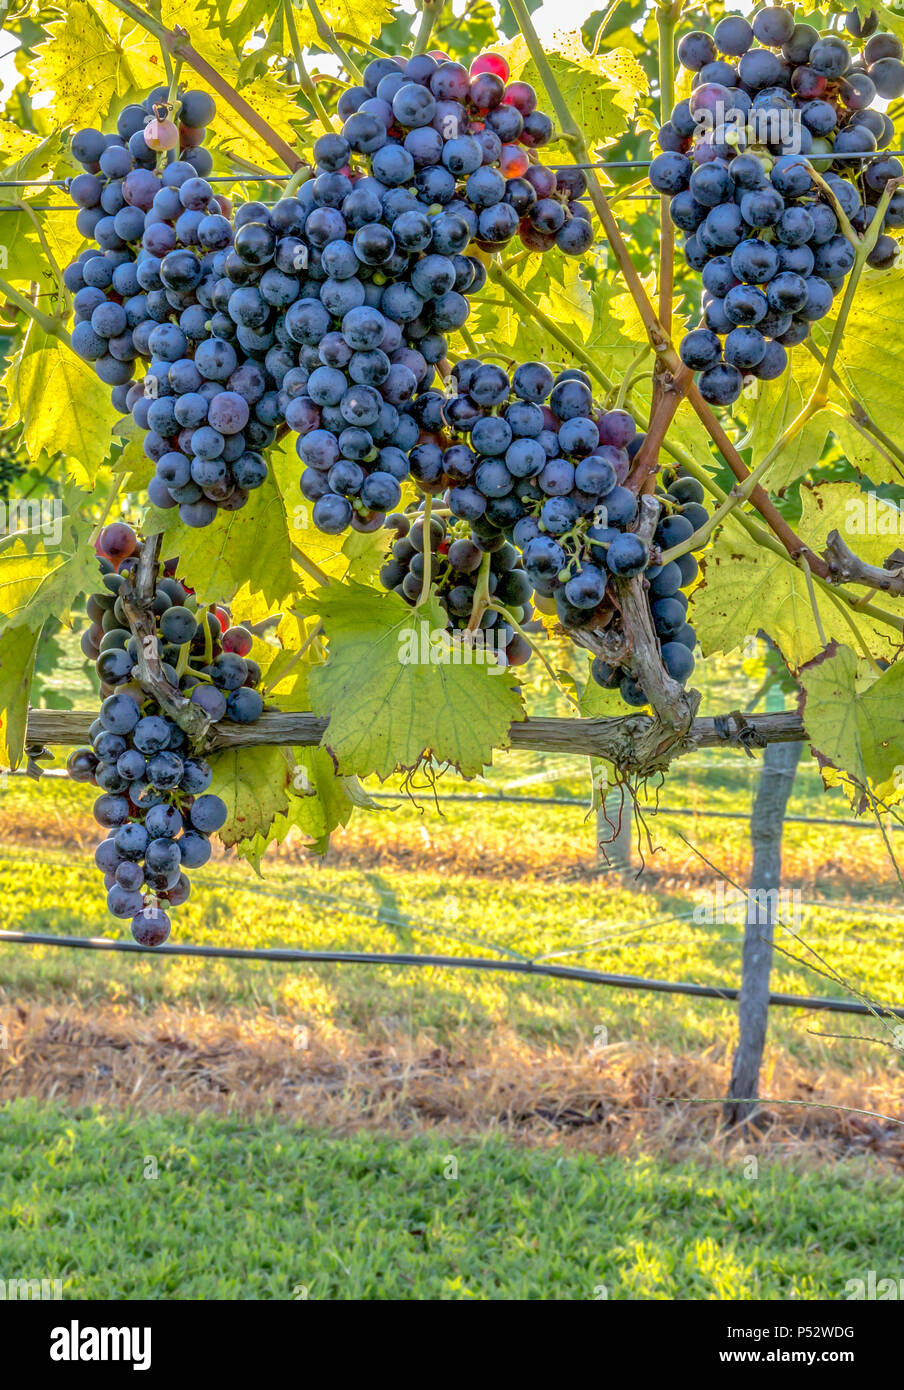 Clusters of grapes growing on the vine at a vineyard Stock Photo